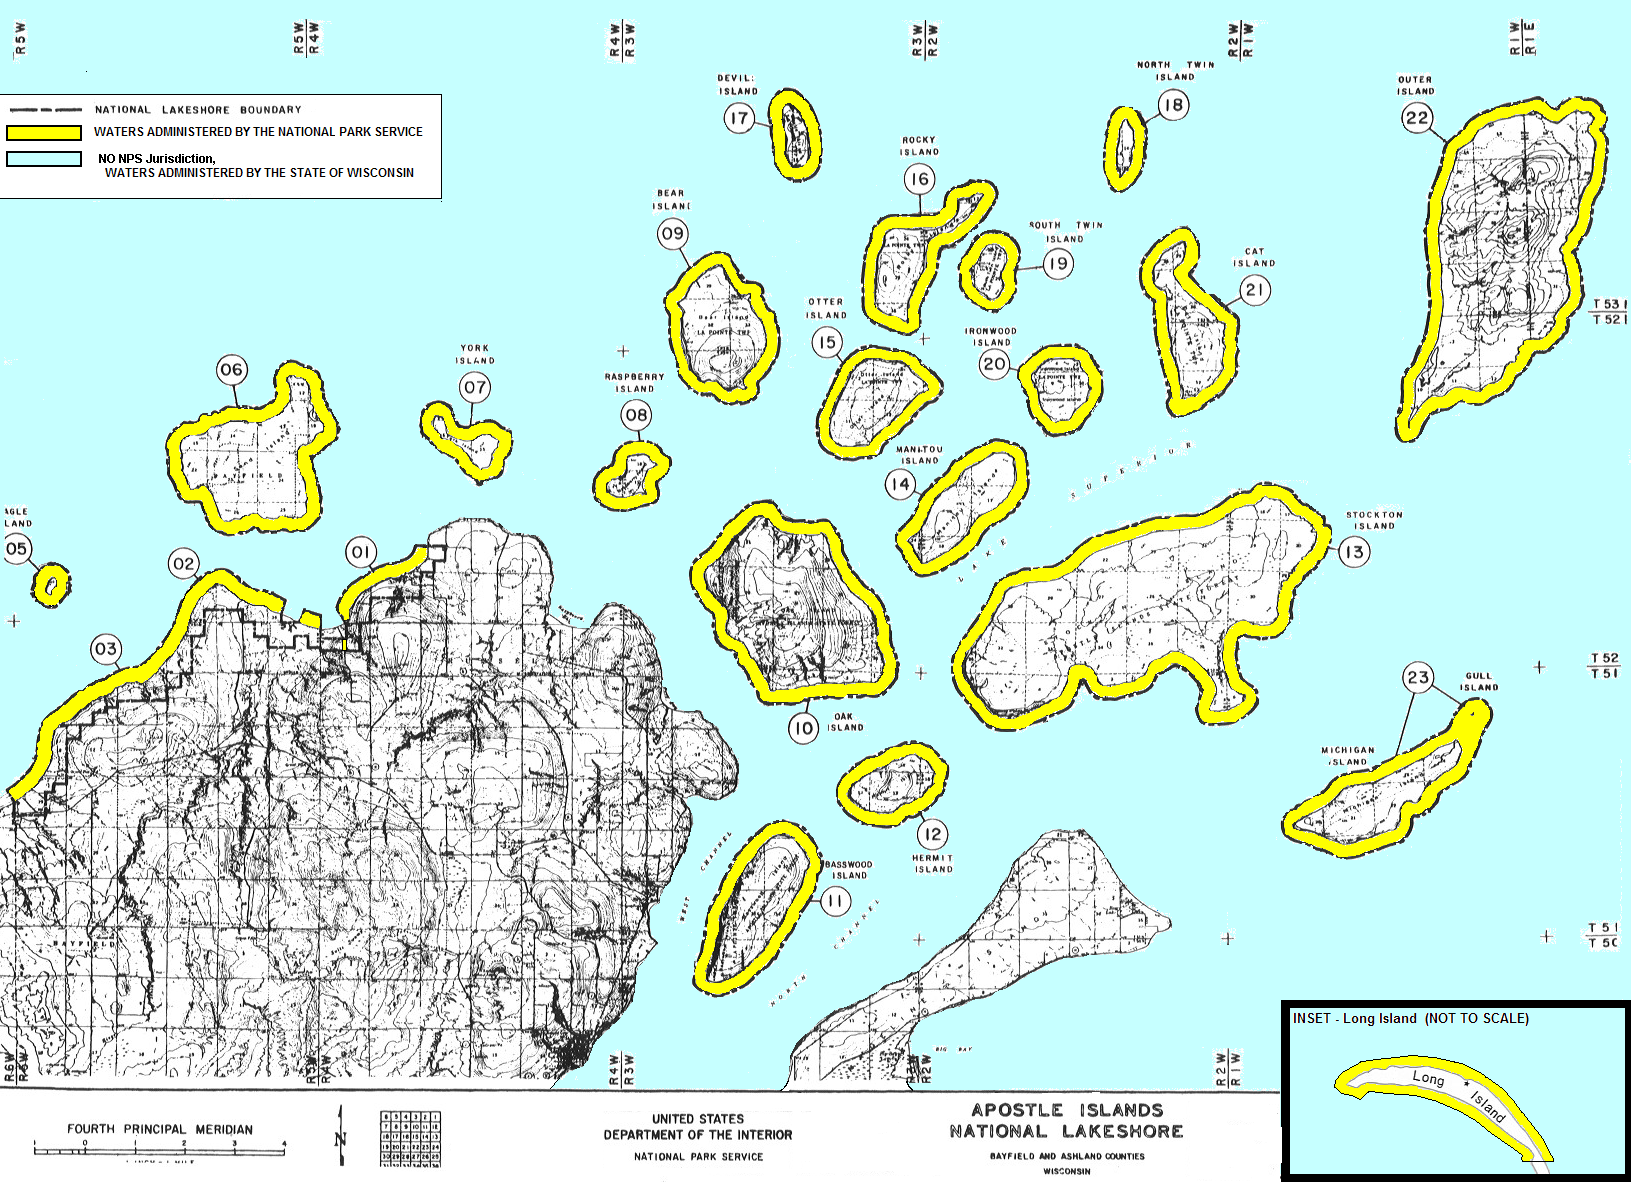 Map of Apostle Islands - yellow 1/4-mile boundaries indicate waters under the jurisdiction of the National Park Service.